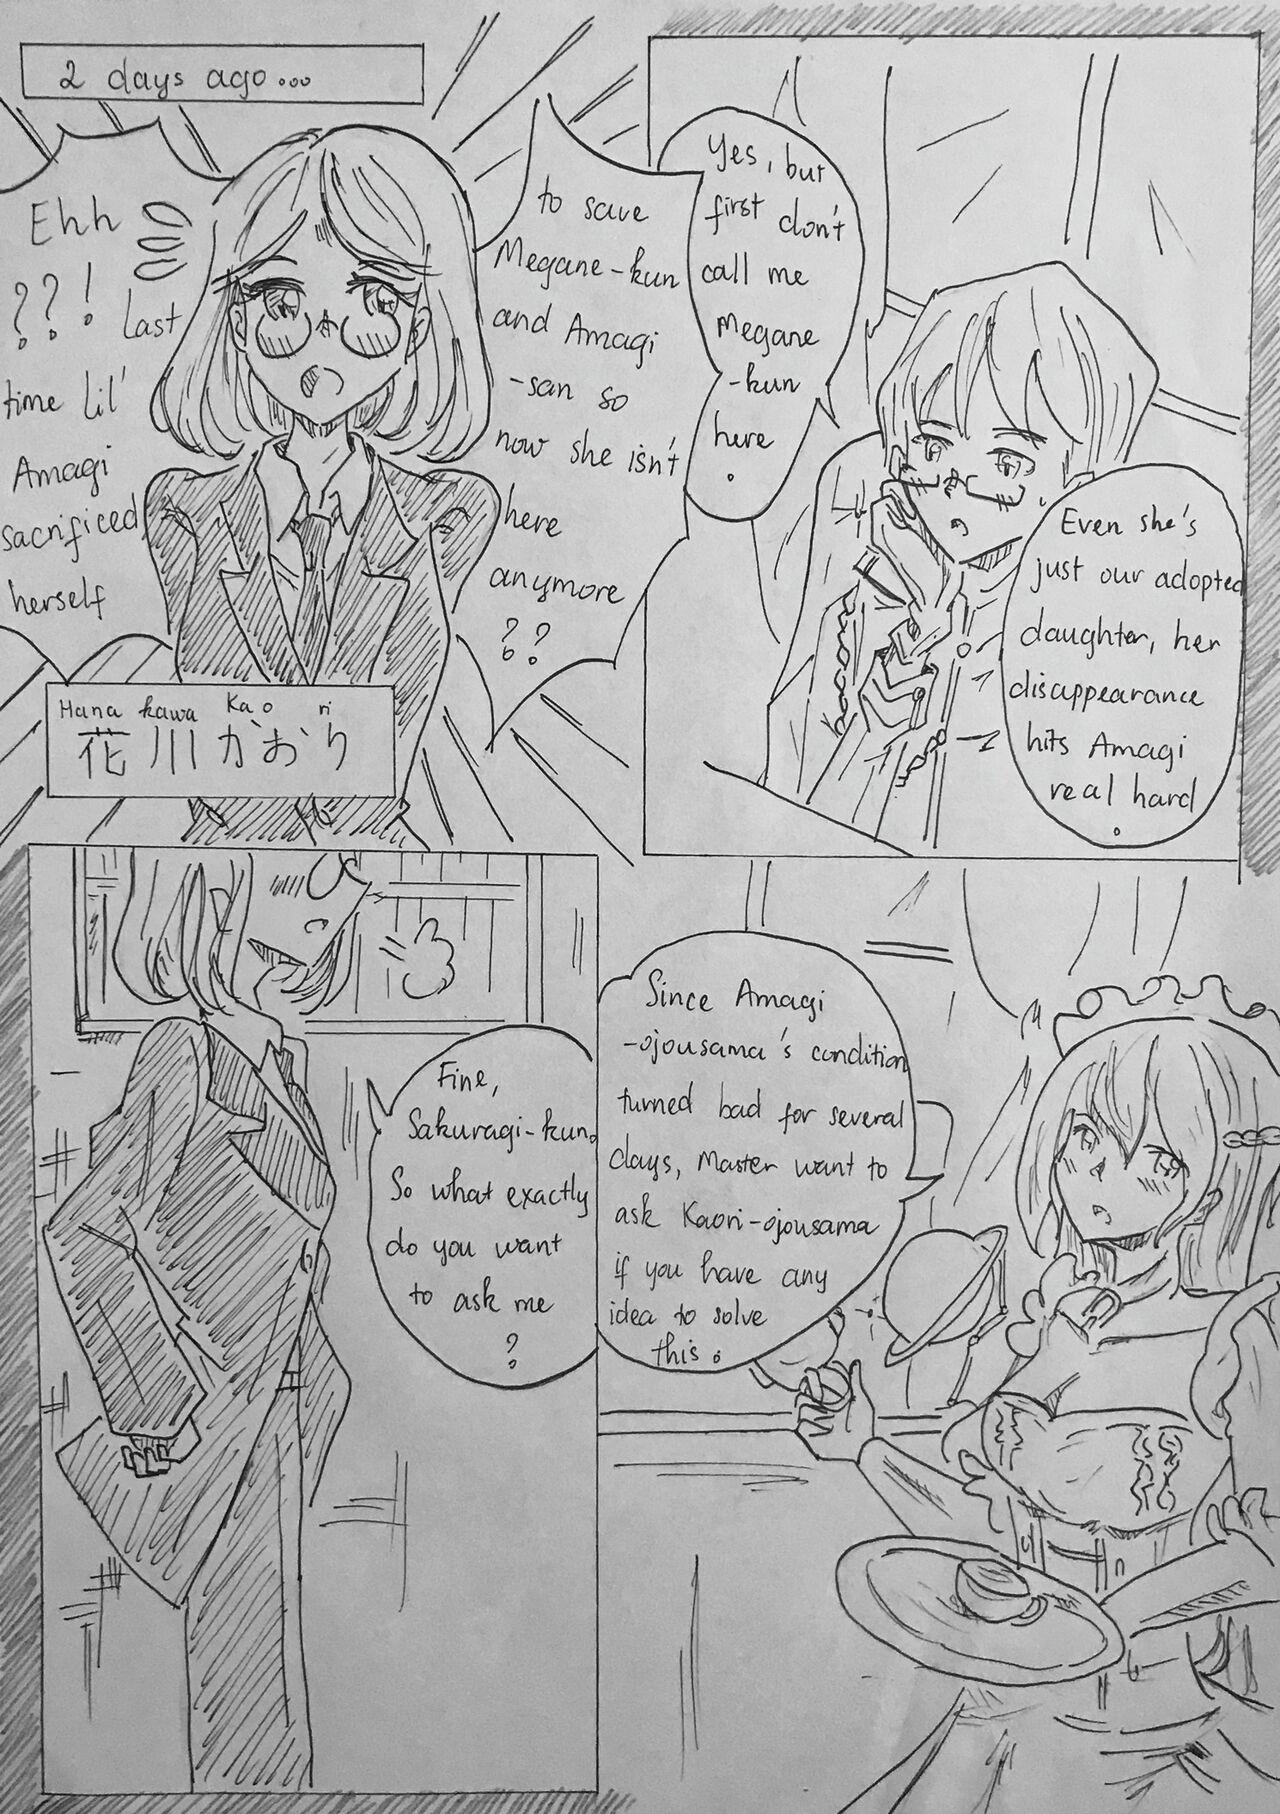 Eurosex All my love for you - Azur lane Ex Girlfriend - Page 3